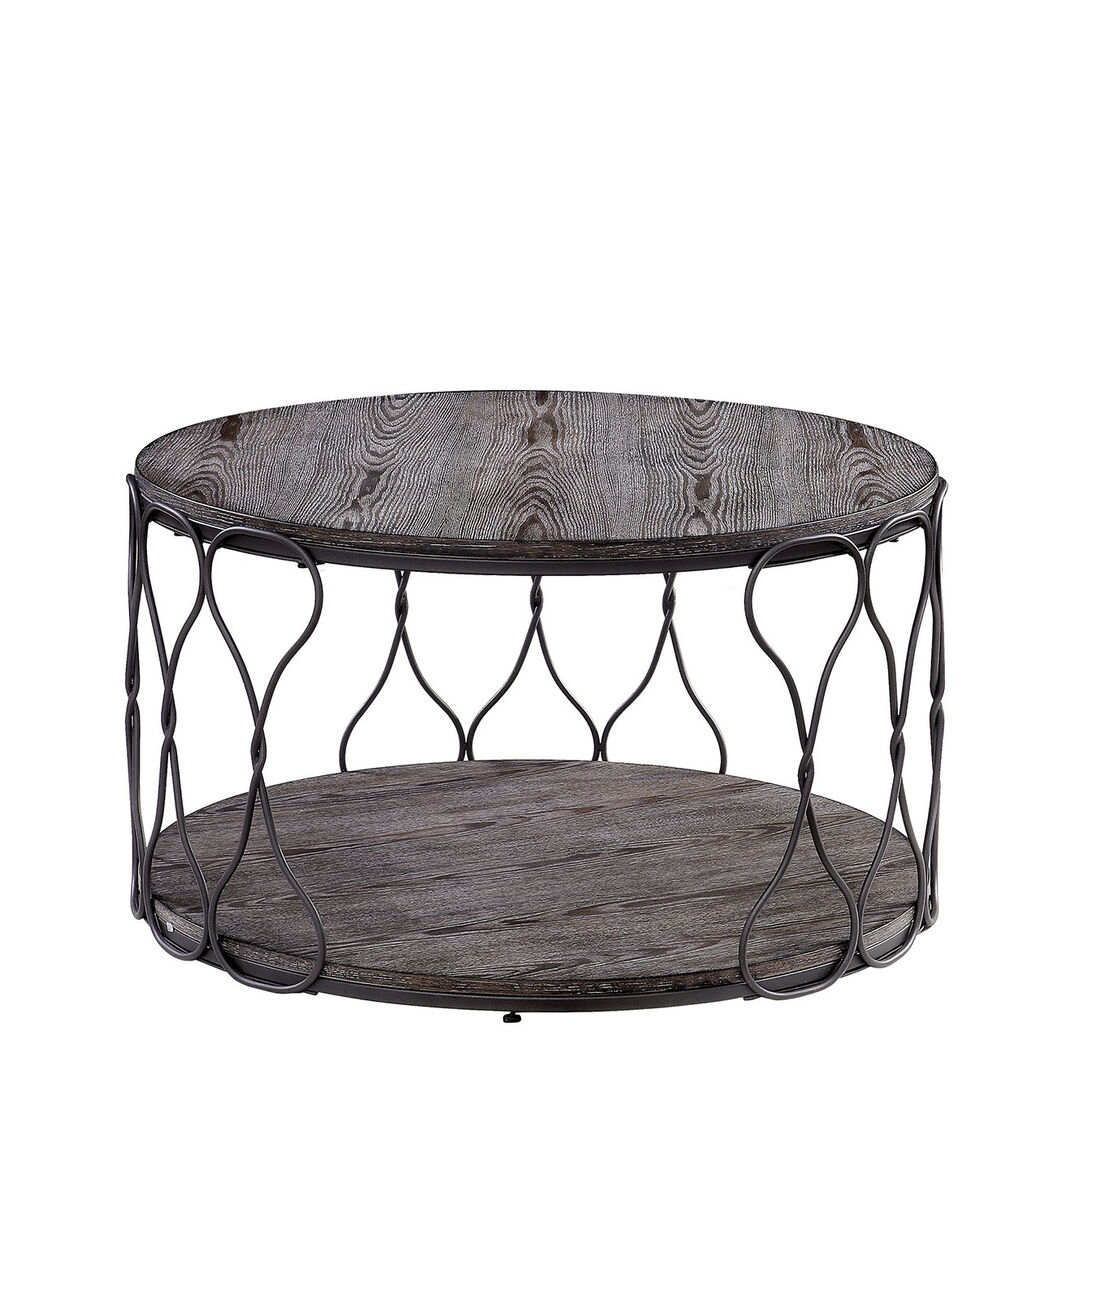 Industrial Style Round Metal and Solid Wood Coffee Table with Open Bottom Shelf, Gray and Brown